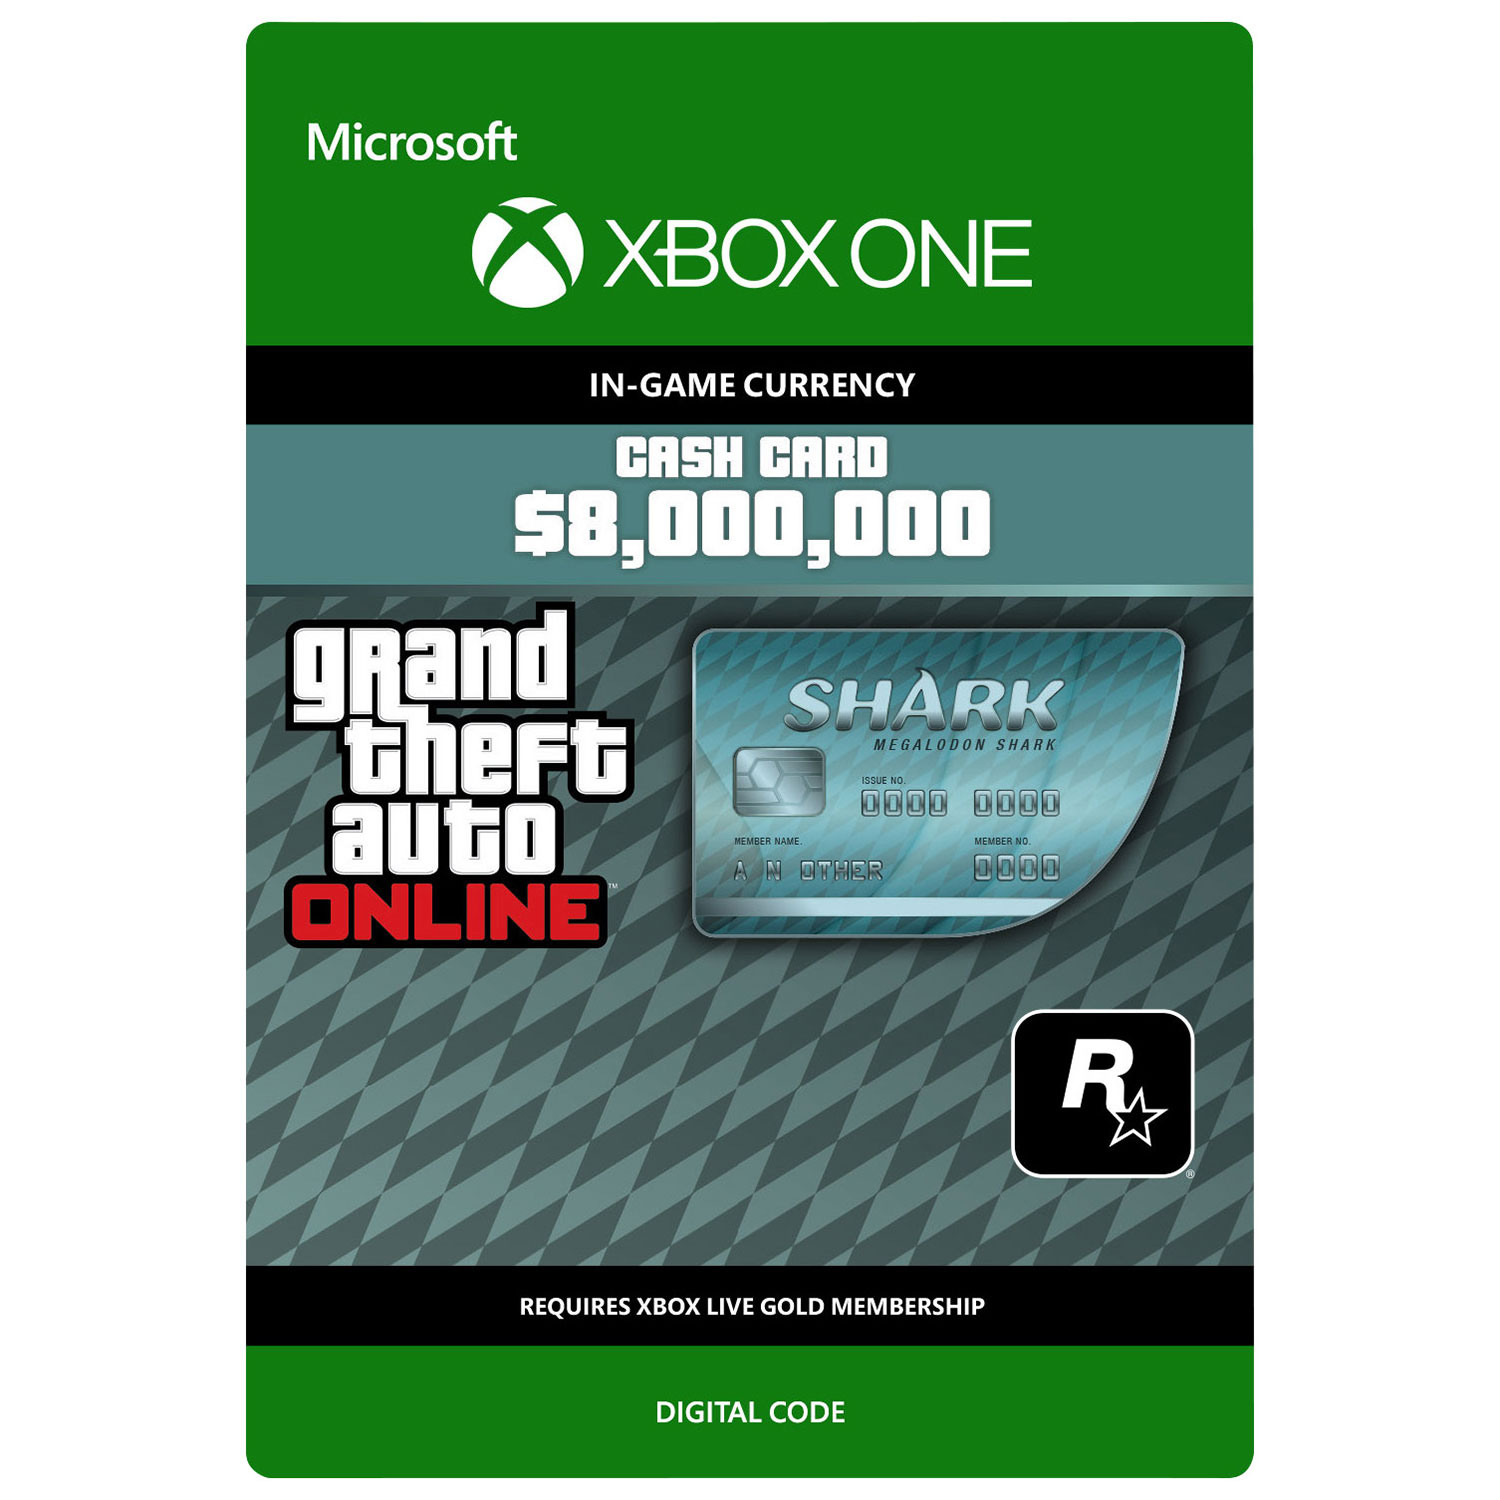 Grand Theft Auto Online $8,000,000 Cash Card Digital Download (Xbox One)